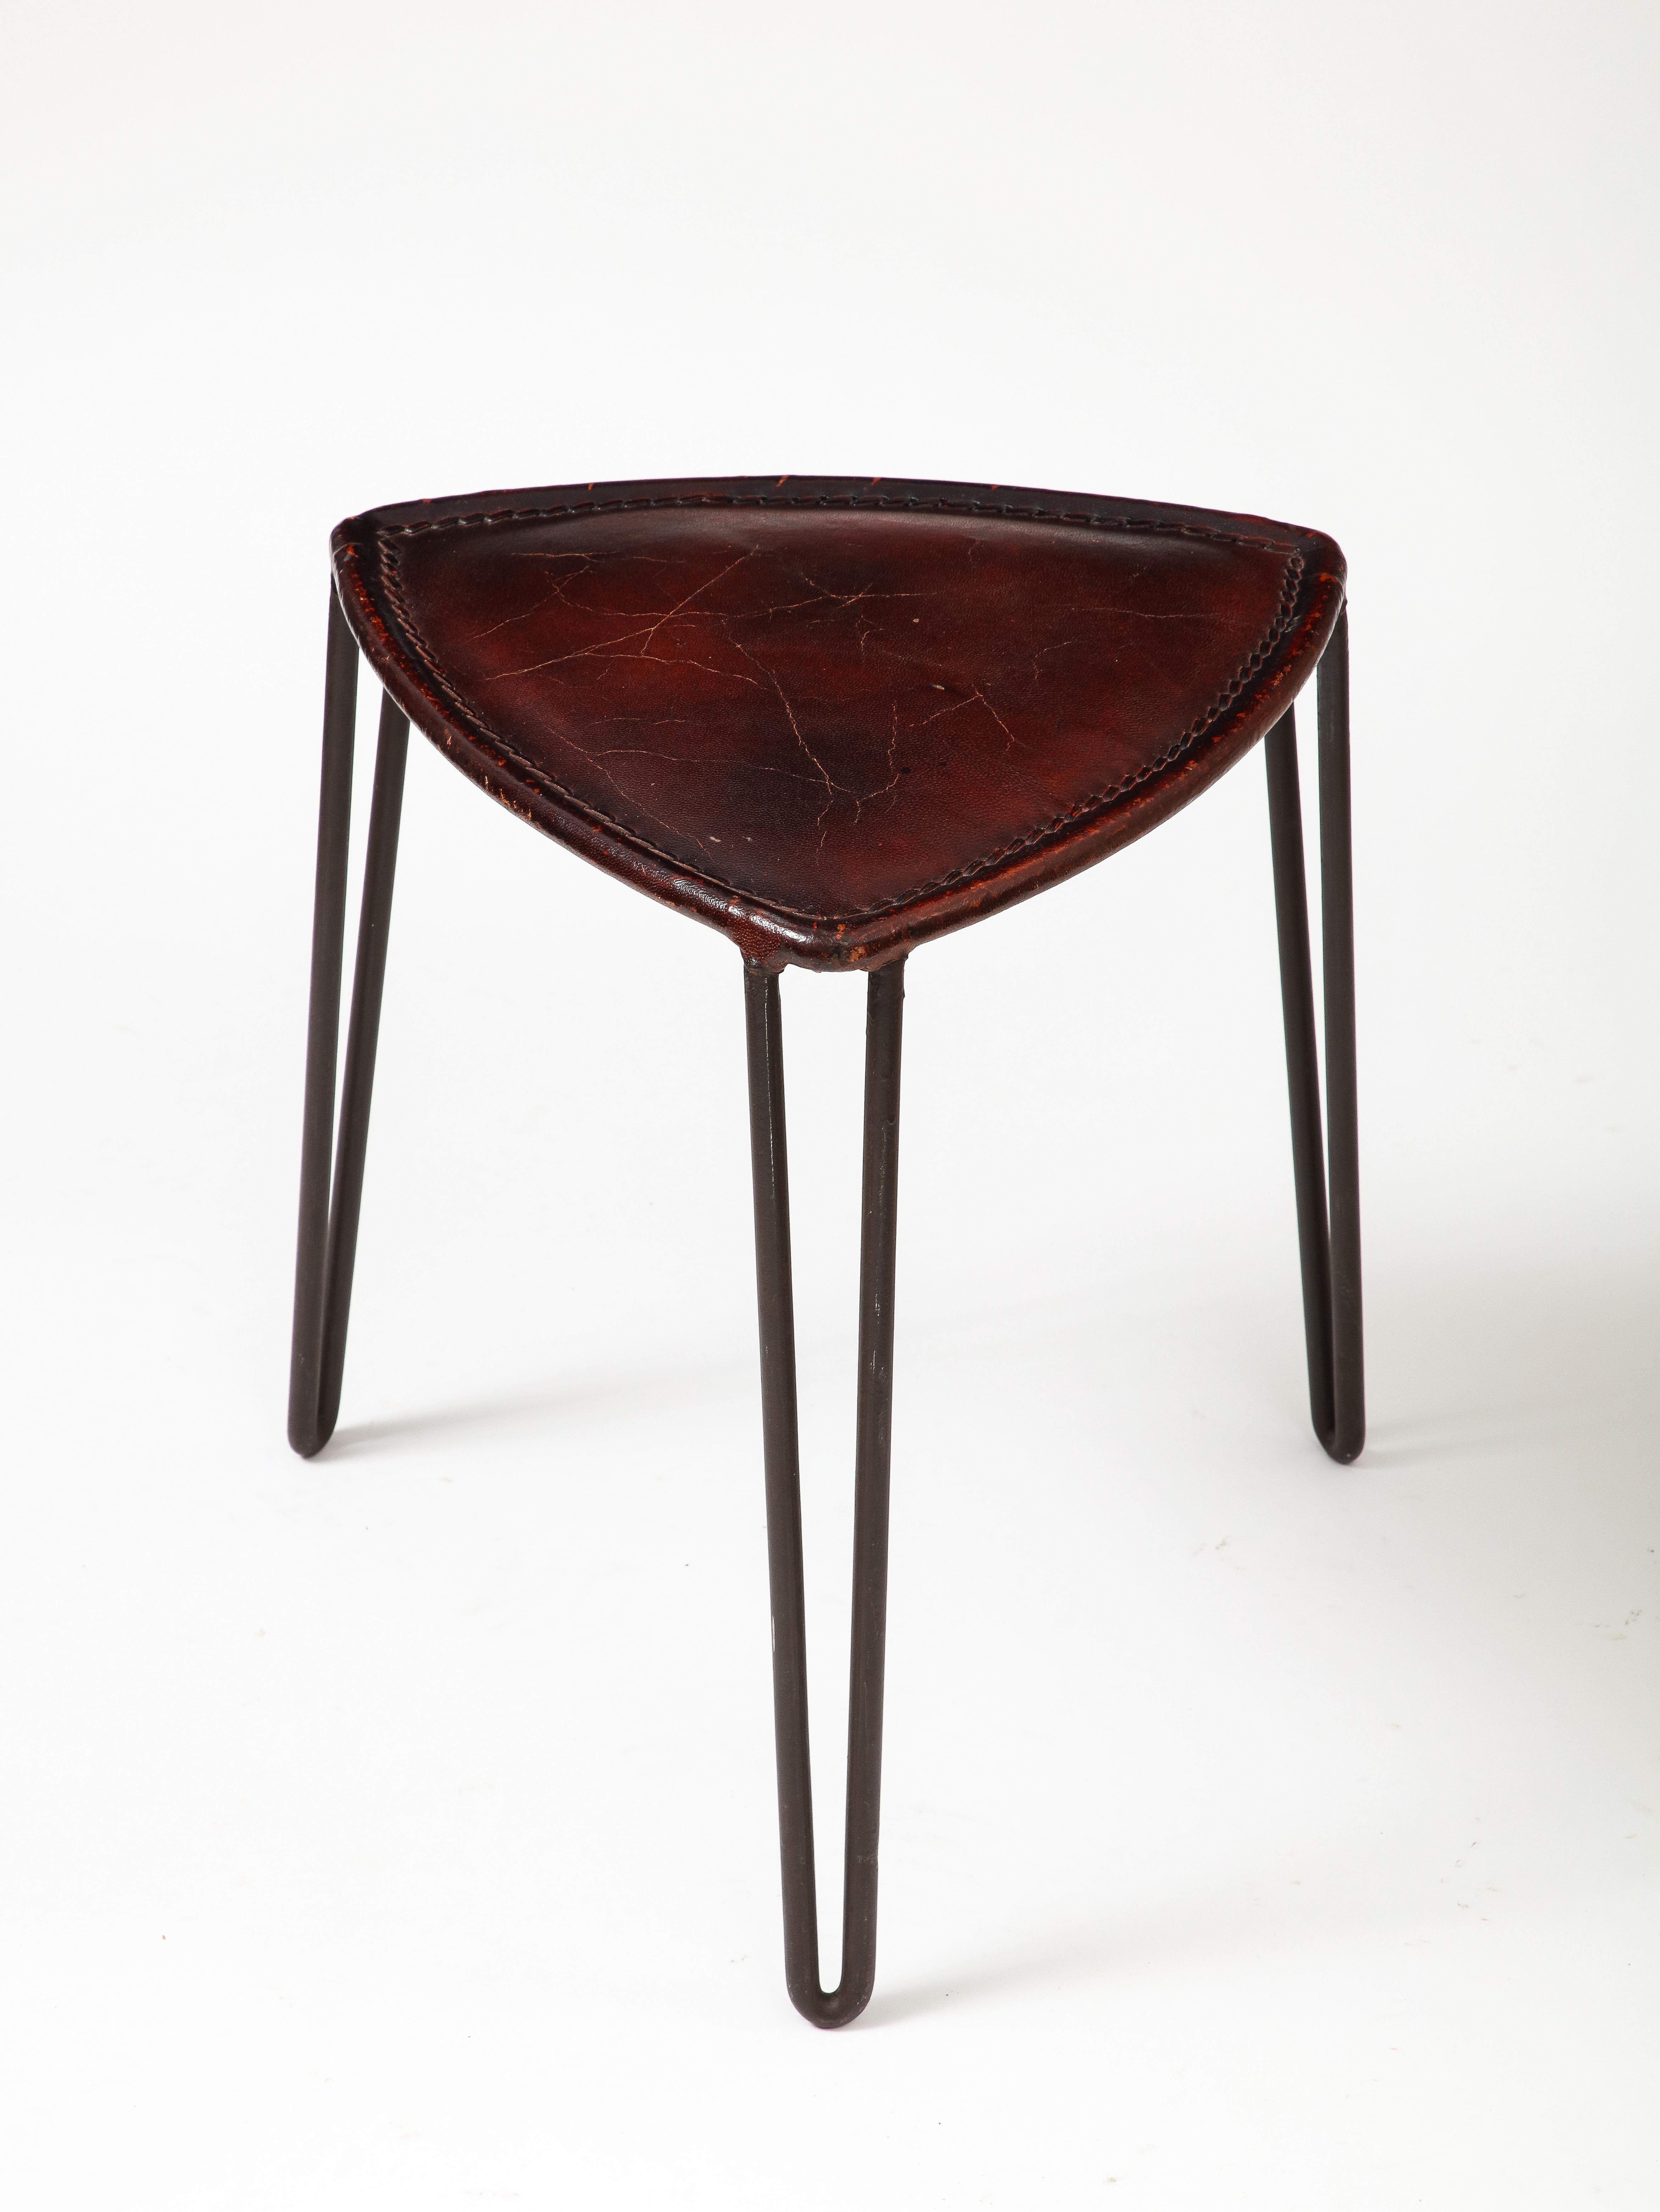 Leather and Metal Stool, France, c. 1950 For Sale 2